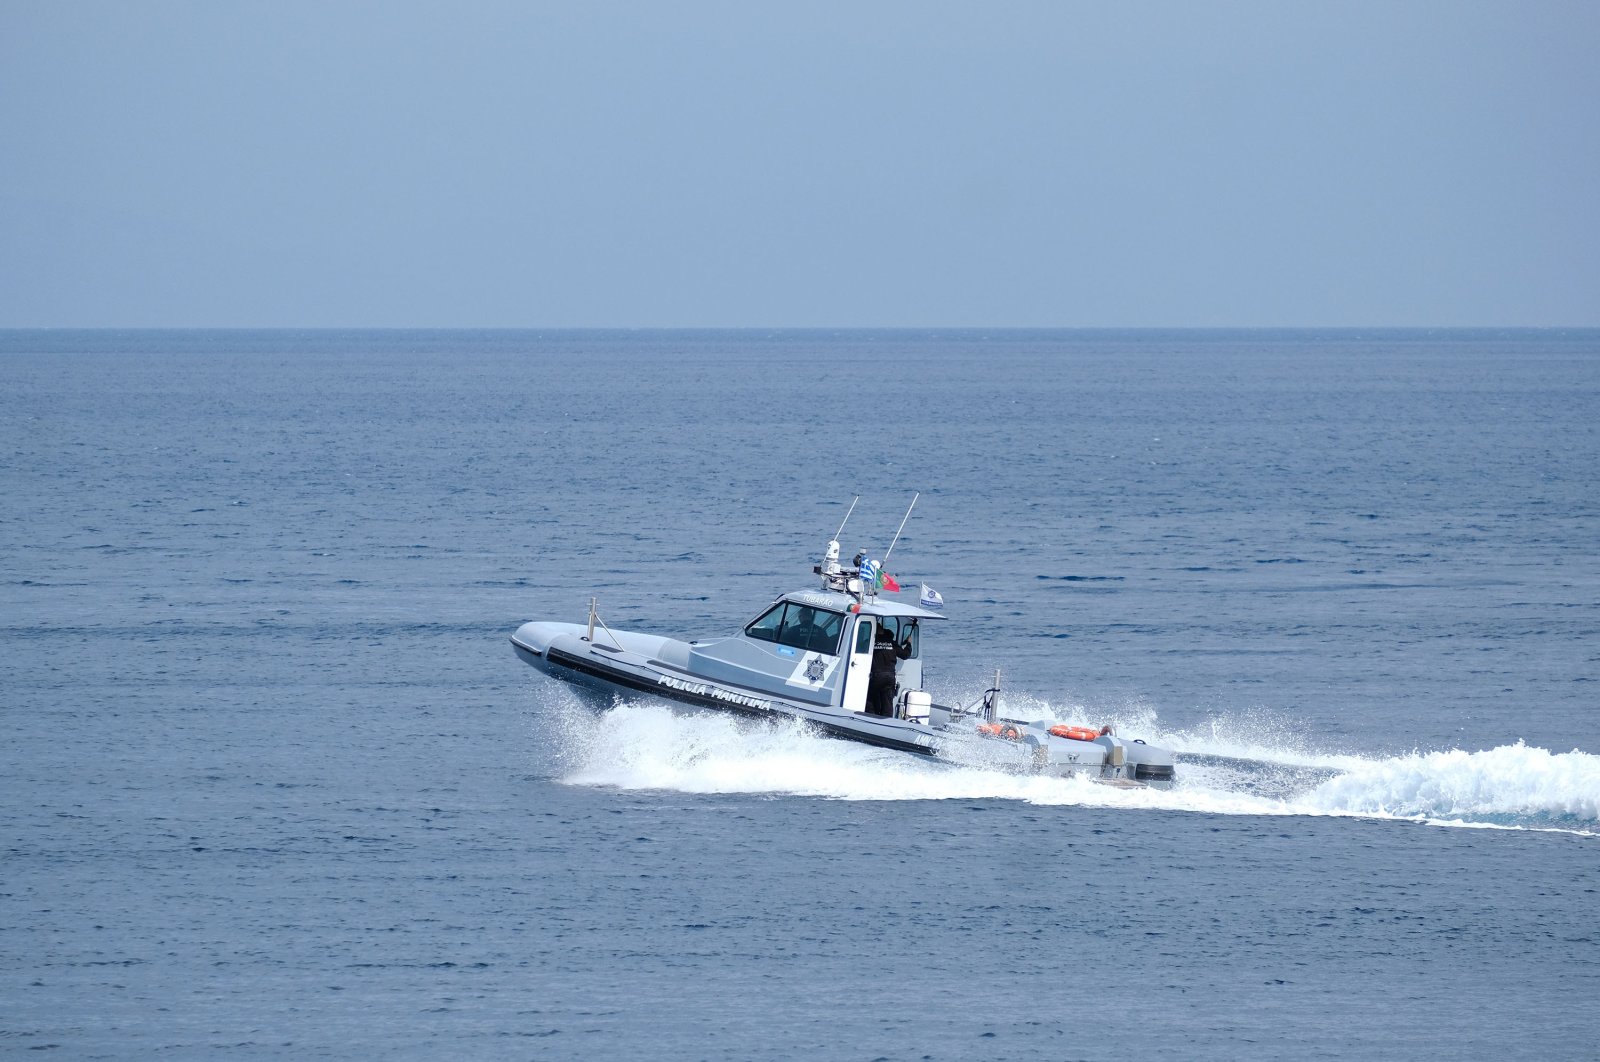 A Frontex patrol vessel cruises near the port of the village of Skala Sikamineas, Greece, March 3, 2020. (Photo by Shutterstock)